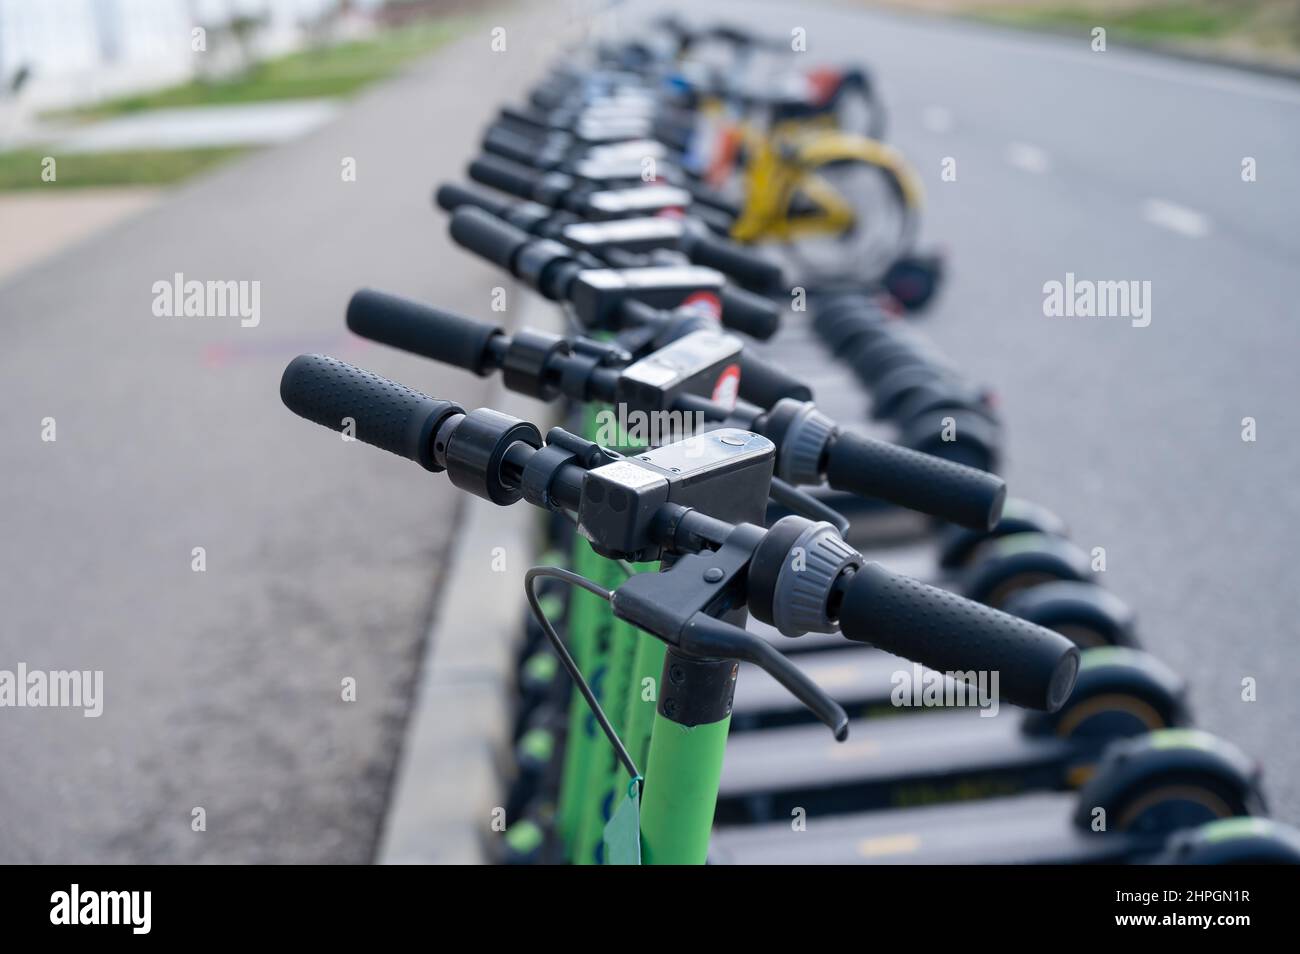 05.02.2022 Sochi, Russia: Row of electric scooters for rent outdoors. Stock Photo